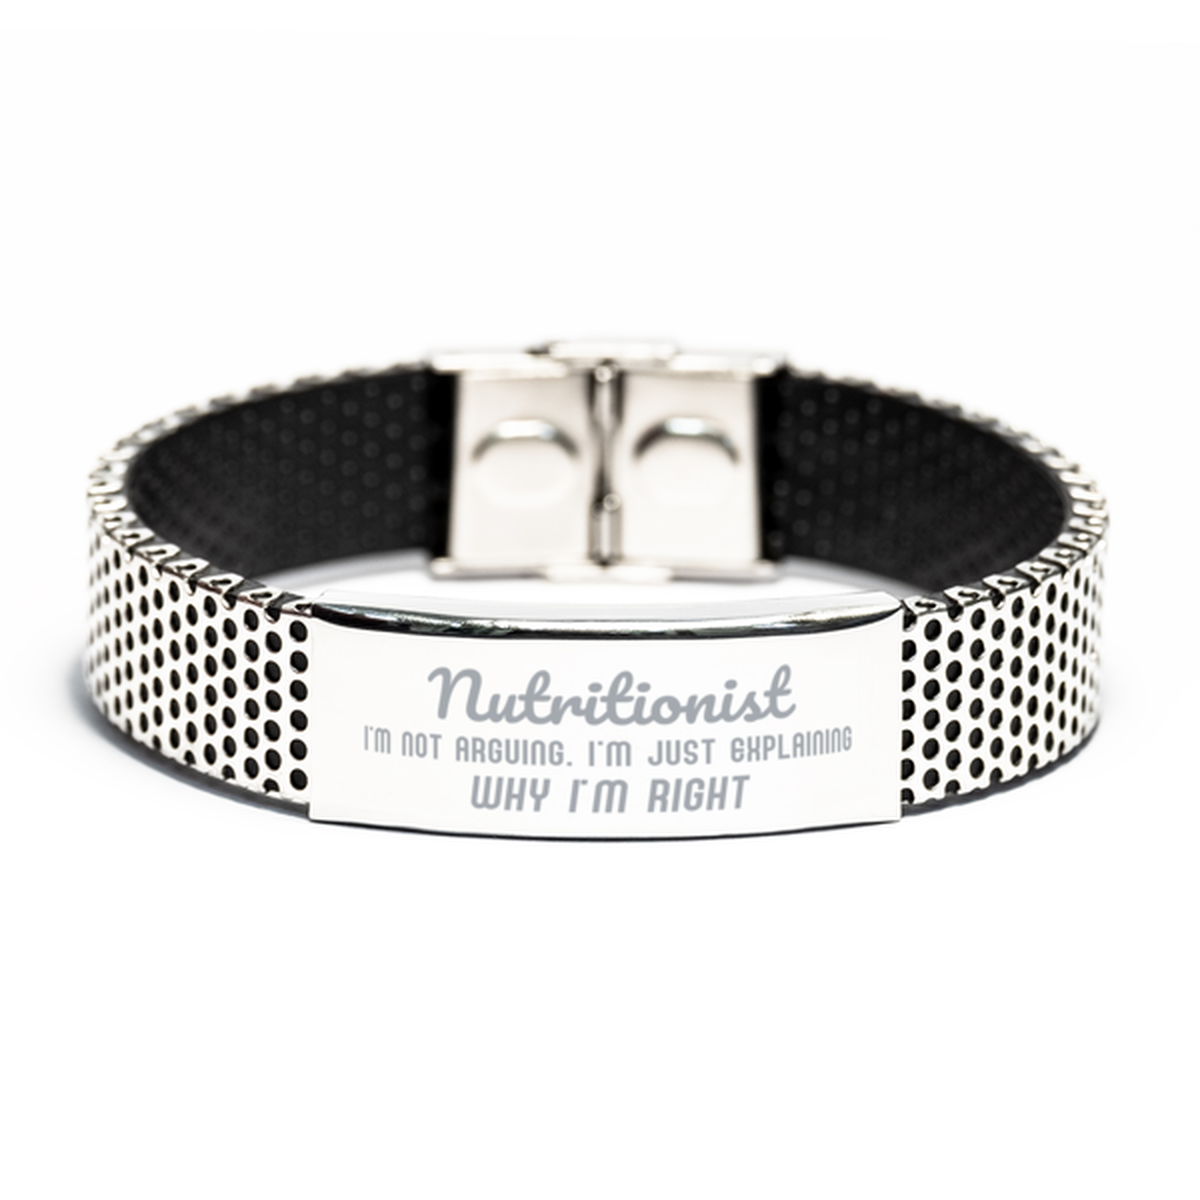 Nutritionist I'm not Arguing. I'm Just Explaining Why I'm RIGHT Stainless Steel Bracelet, Funny Saying Quote Nutritionist Gifts For Nutritionist Graduation Birthday Christmas Gifts for Men Women Coworker